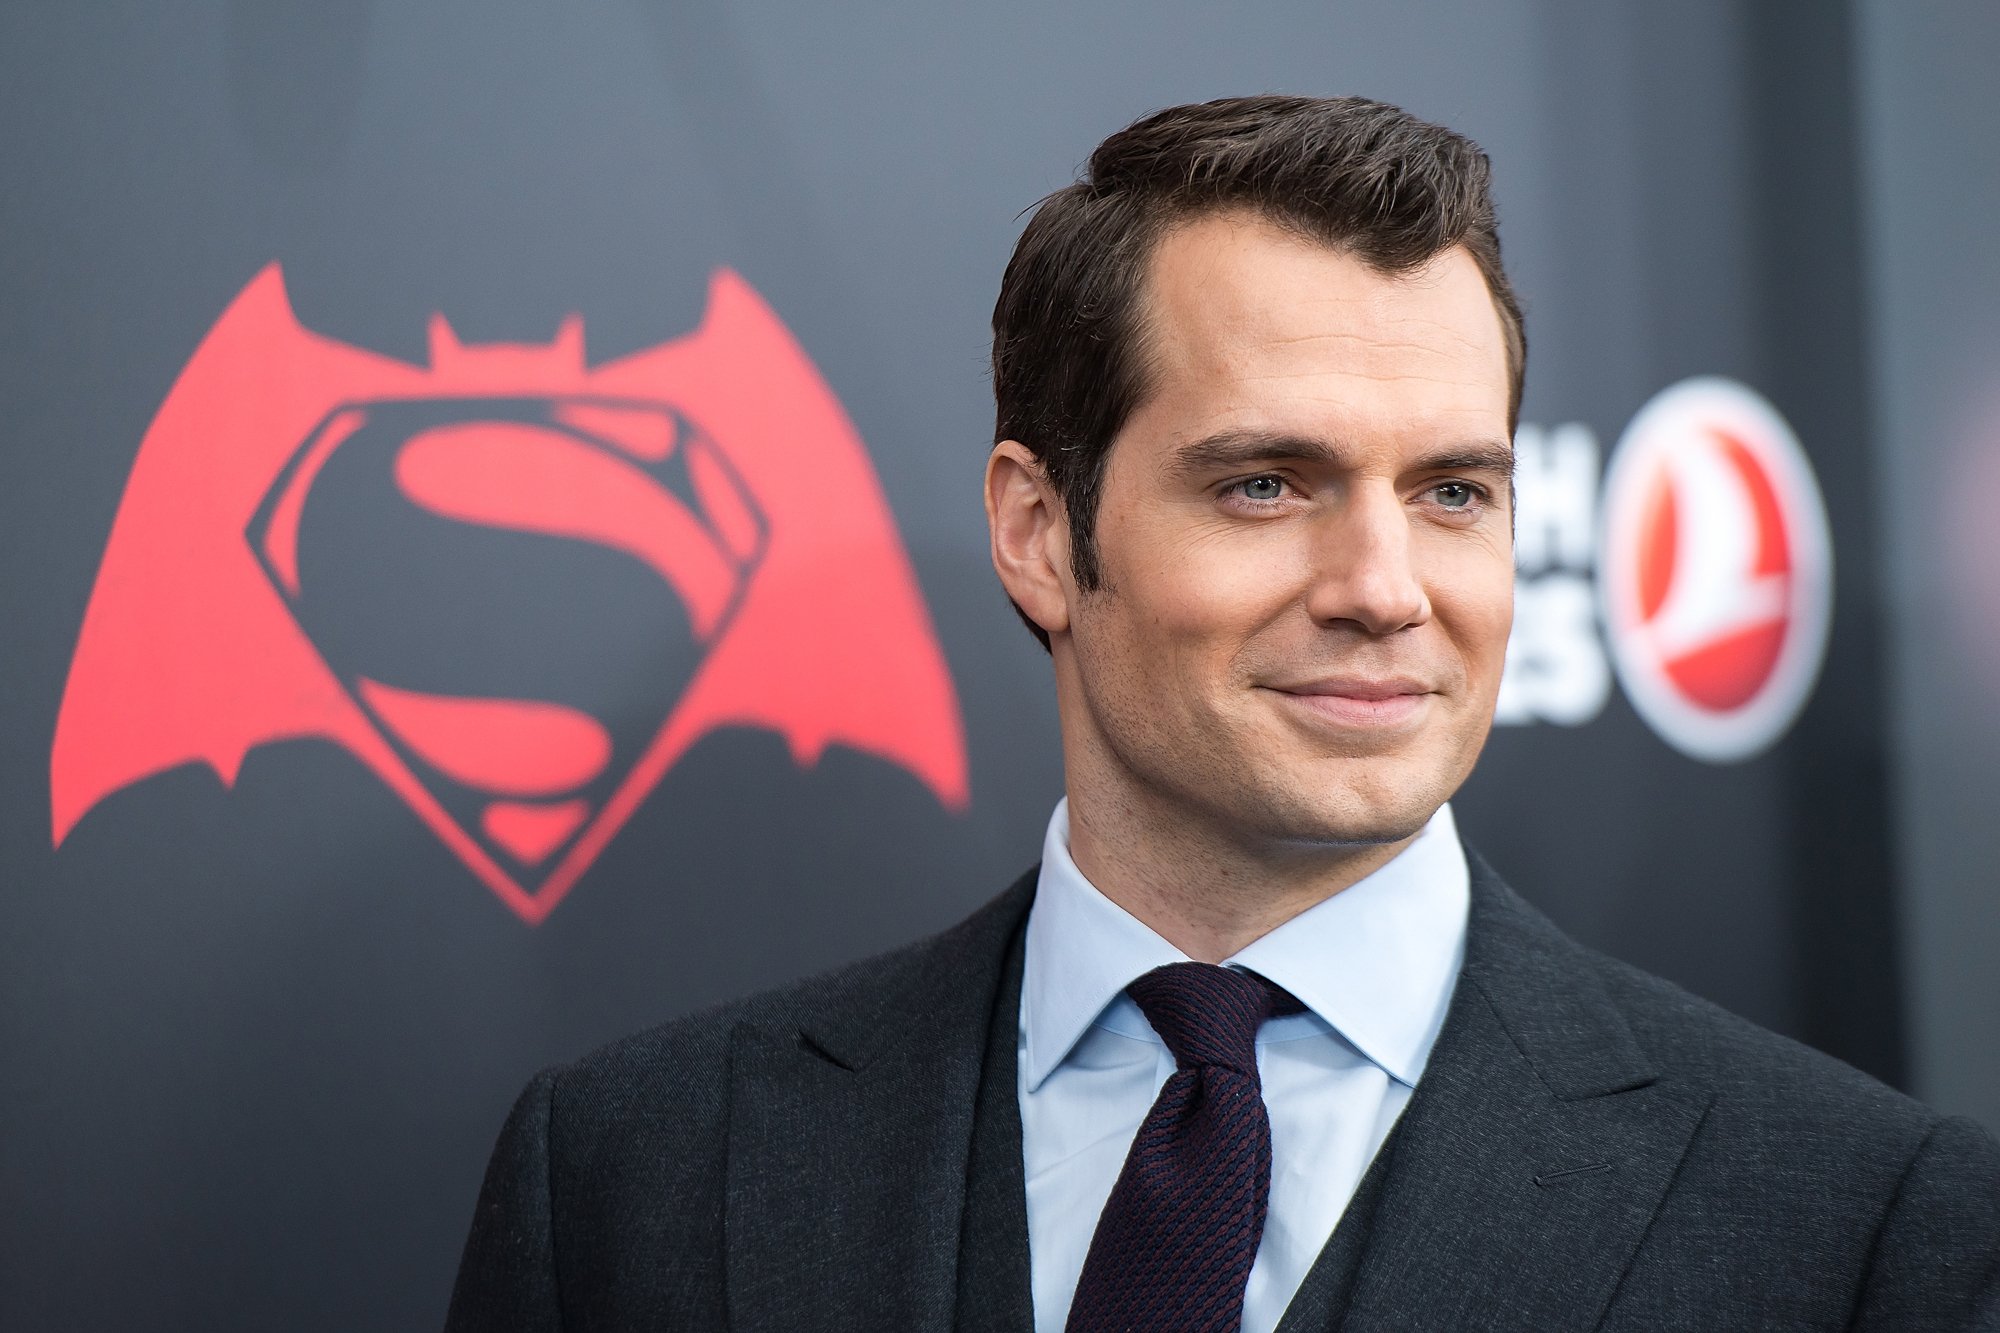 Henry Cavill stuns as Captain Britain in jaw-dropping new MCU image